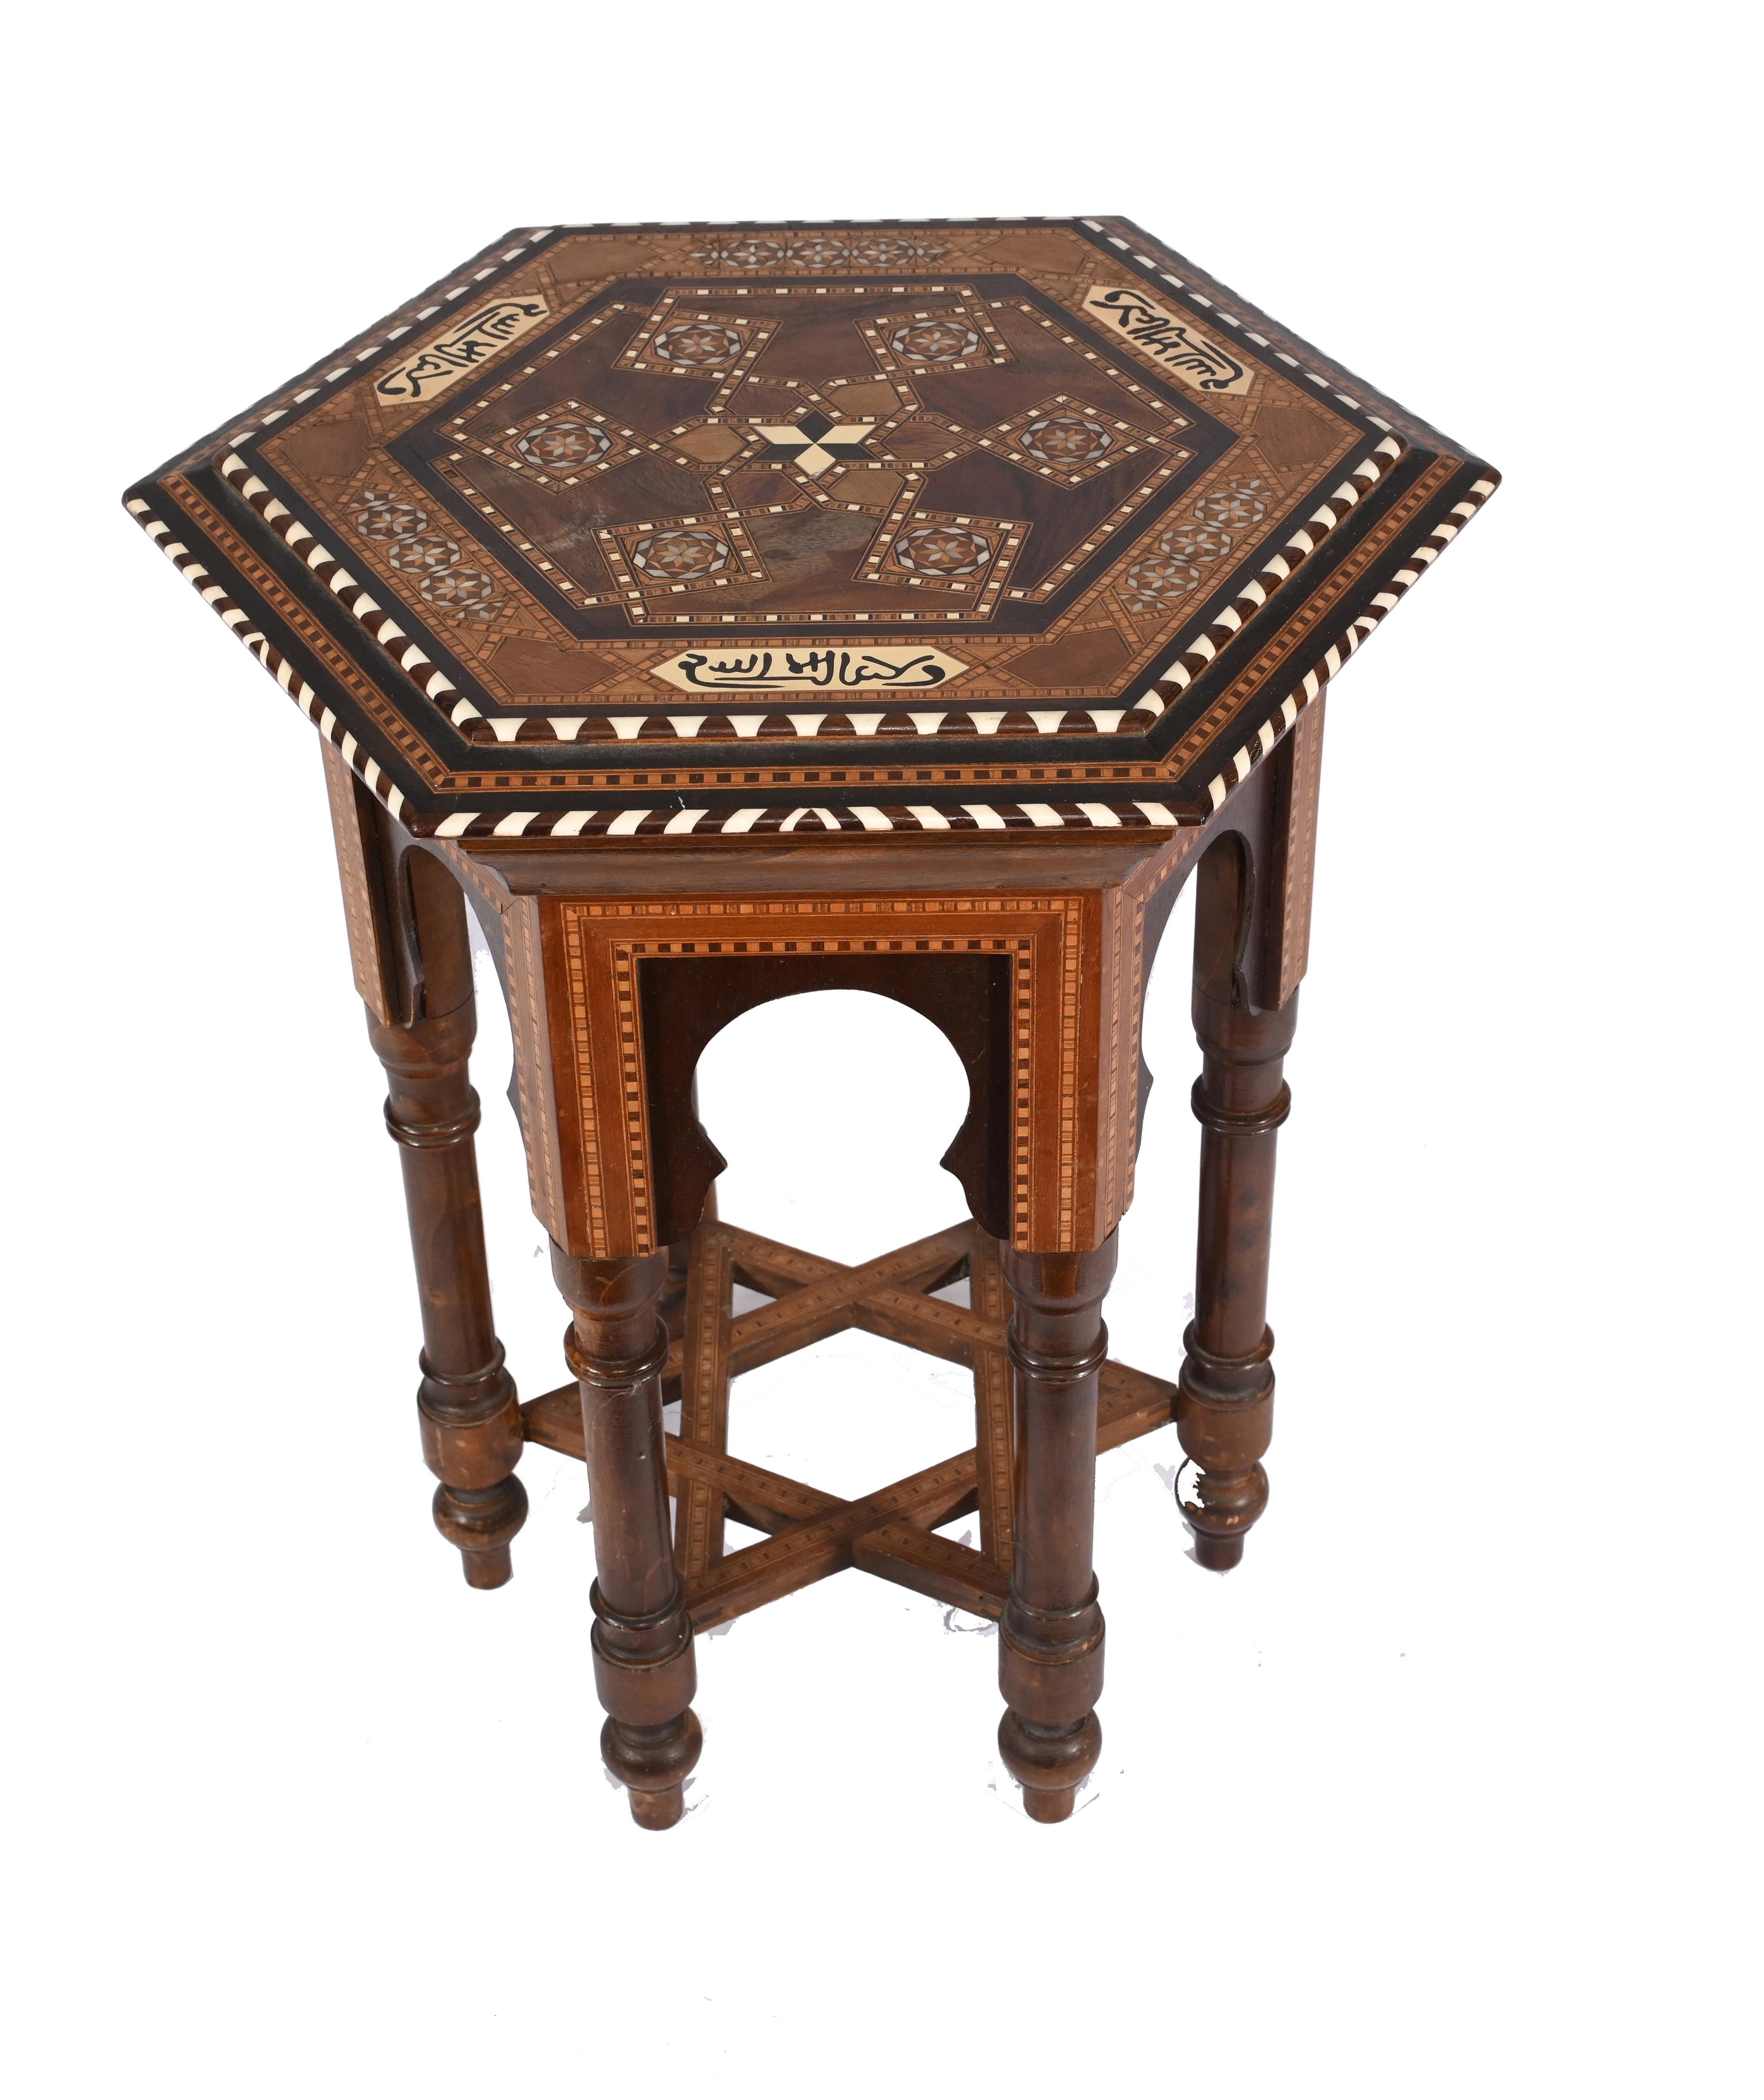 Elegant inlaid shaped Damascan Islamic table with inscribed with prayers
Inlaid with bone and exotic wood c.1860
Great look and the levels of craftsmanship on something like this is incredible
Some of our items are in storage so please check